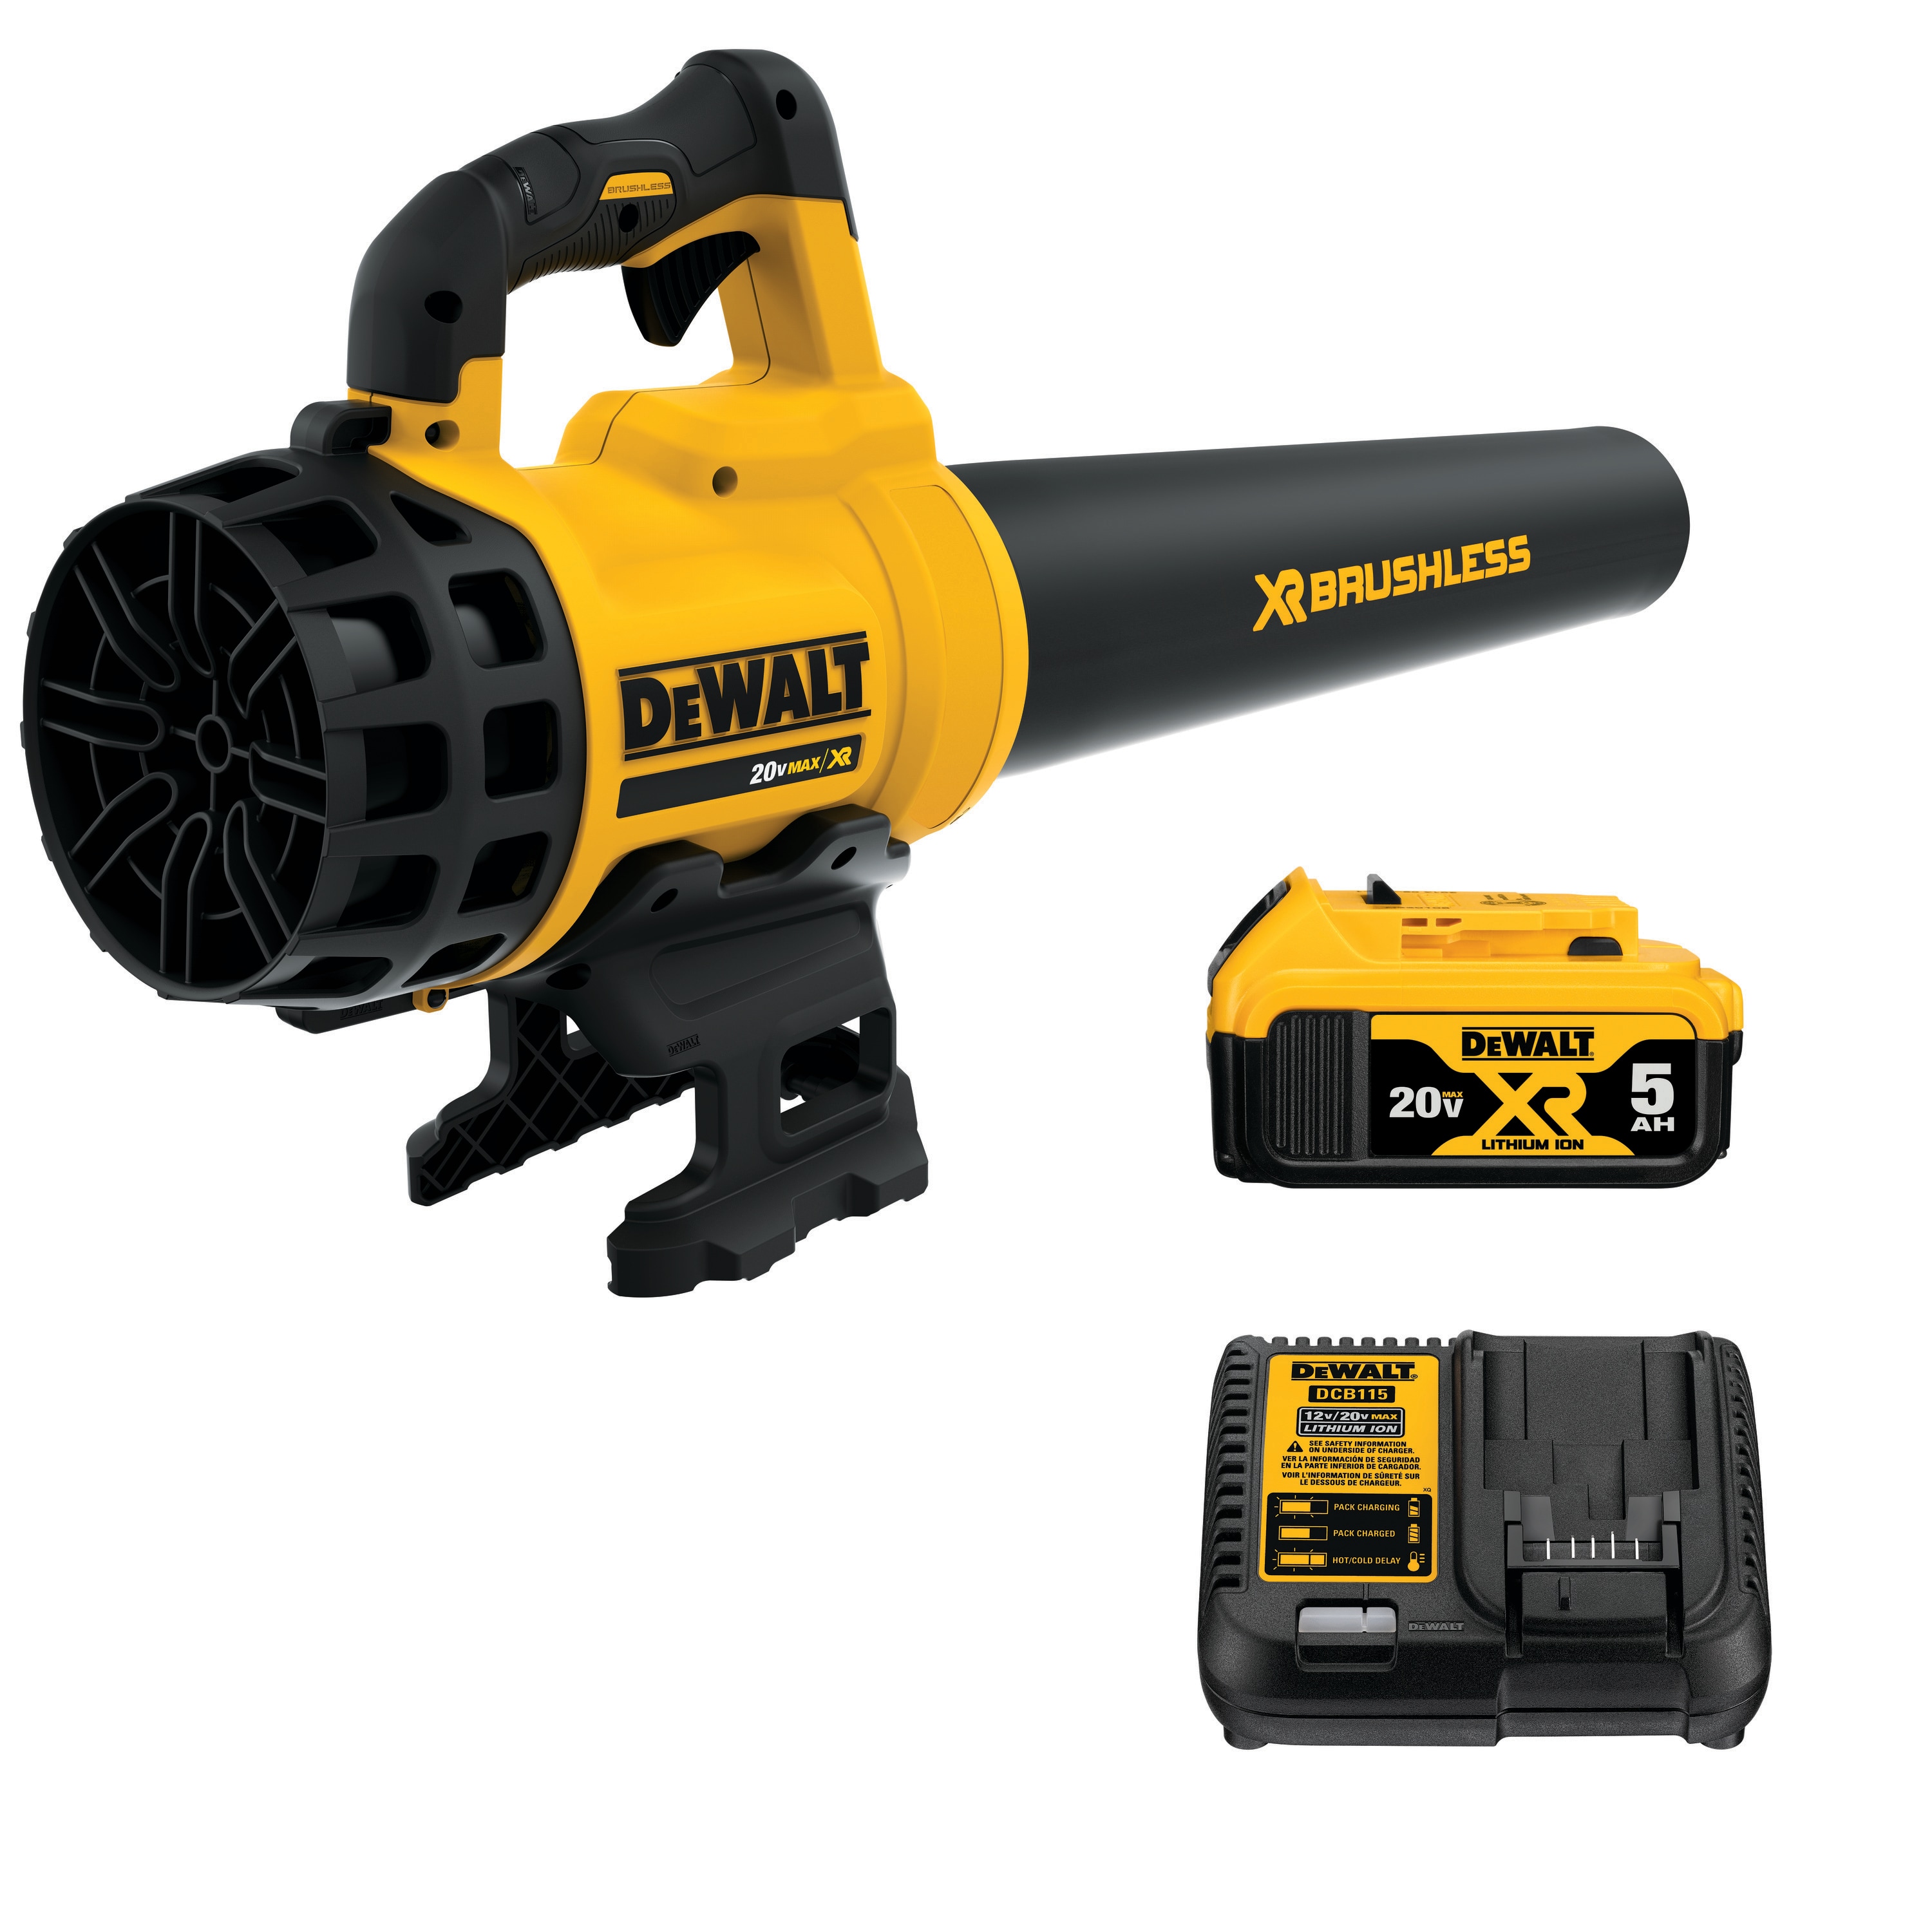 Cordless Leaf Blower for DeWalt 20V Max Battery,Electric Jobsite Air Blower with Brushless Motor,6 Variable Speed Up to 180MPH,2-in-1 Handle